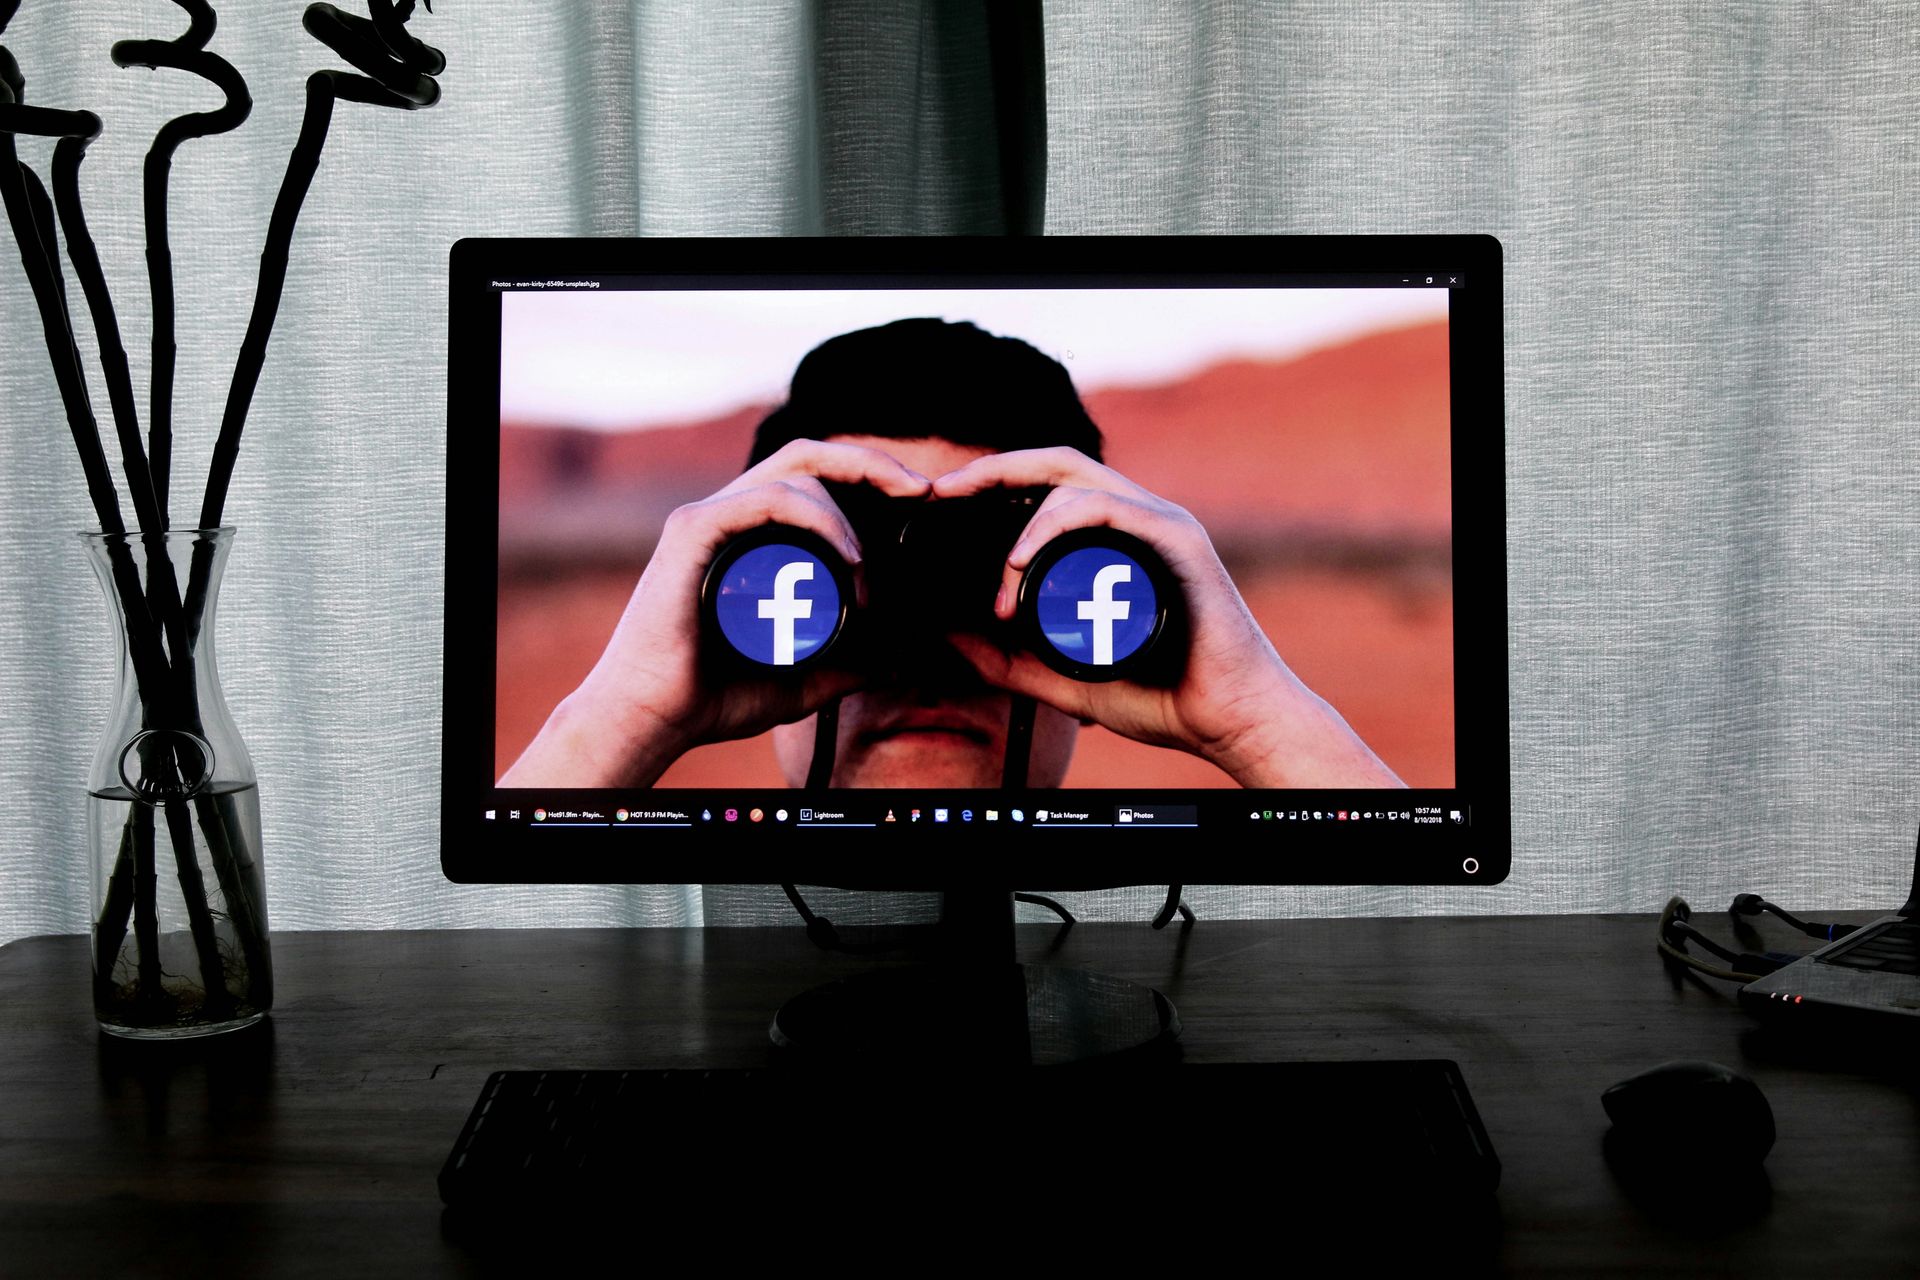 A computer monitor shows a man looking through binoculars with a facebook logo on the screen.